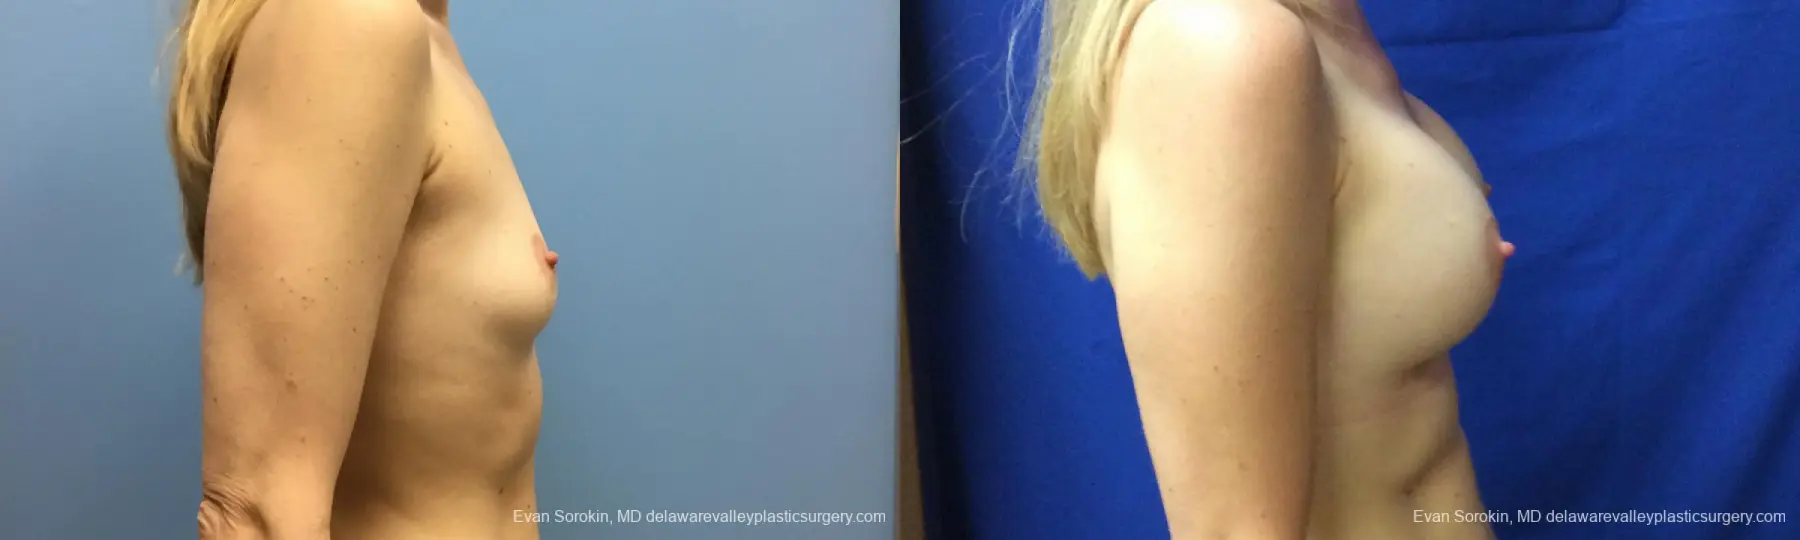 Philadelphia Breast Augmentation 12520 - Before and After 4